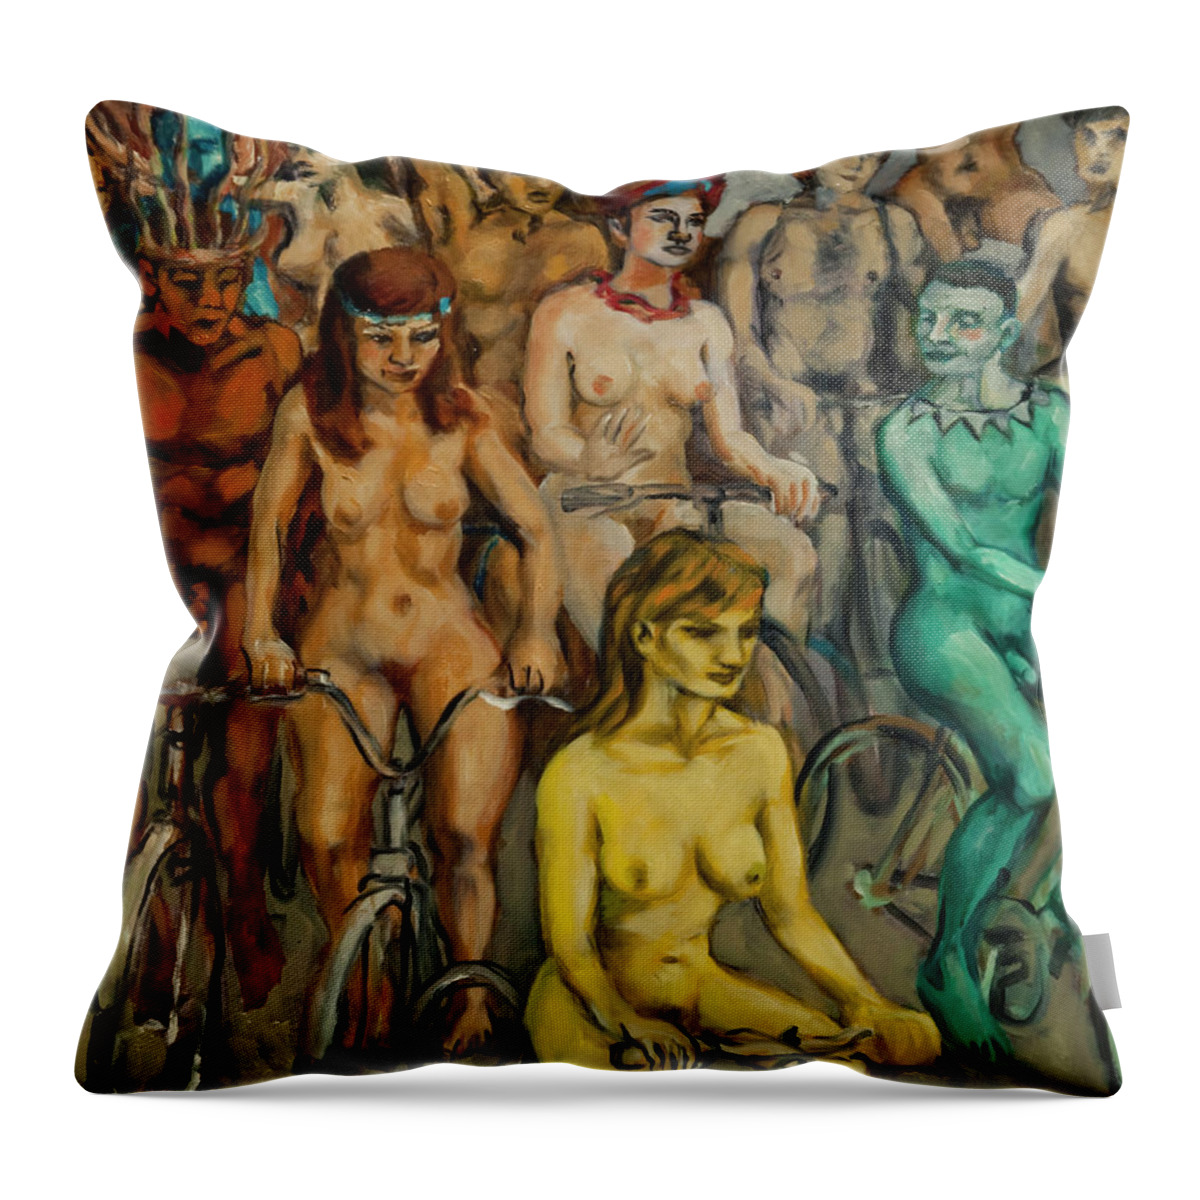 Body-paint Throw Pillow featuring the painting Nude cyclists with bodypaint by Peregrine Roskilly